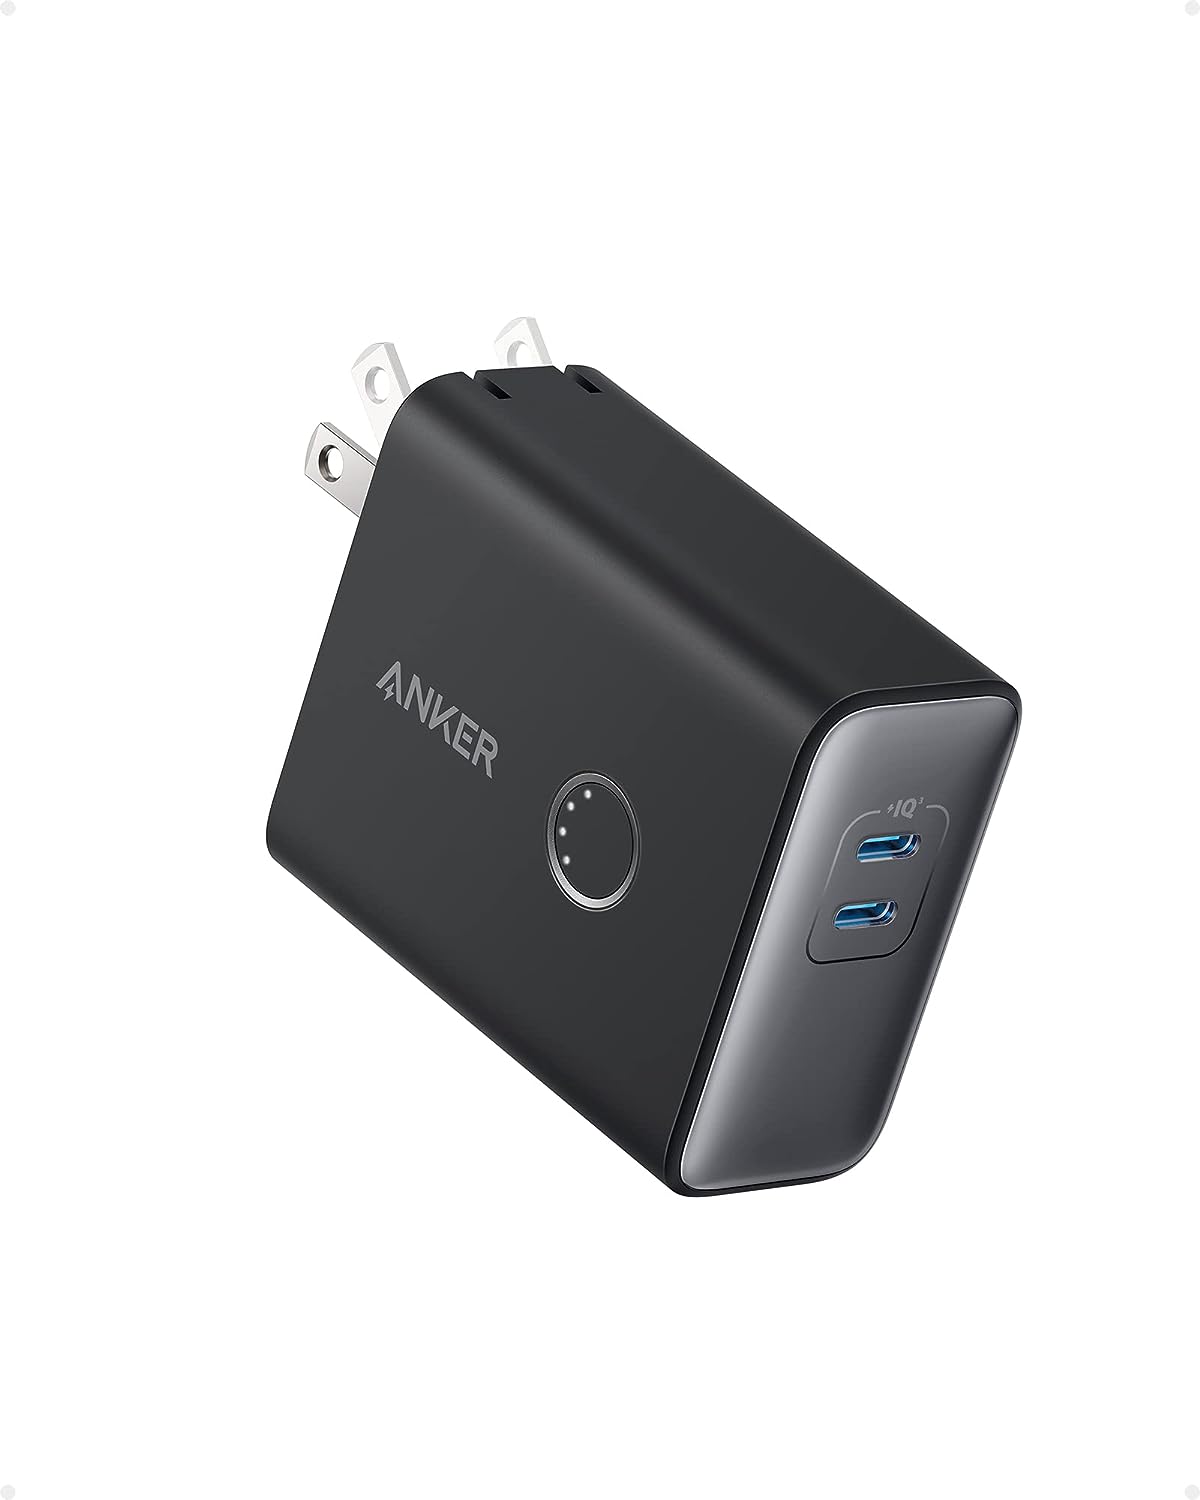 Anker 521 PowerCore Fusion: 45W Charger & Power Bank Combo